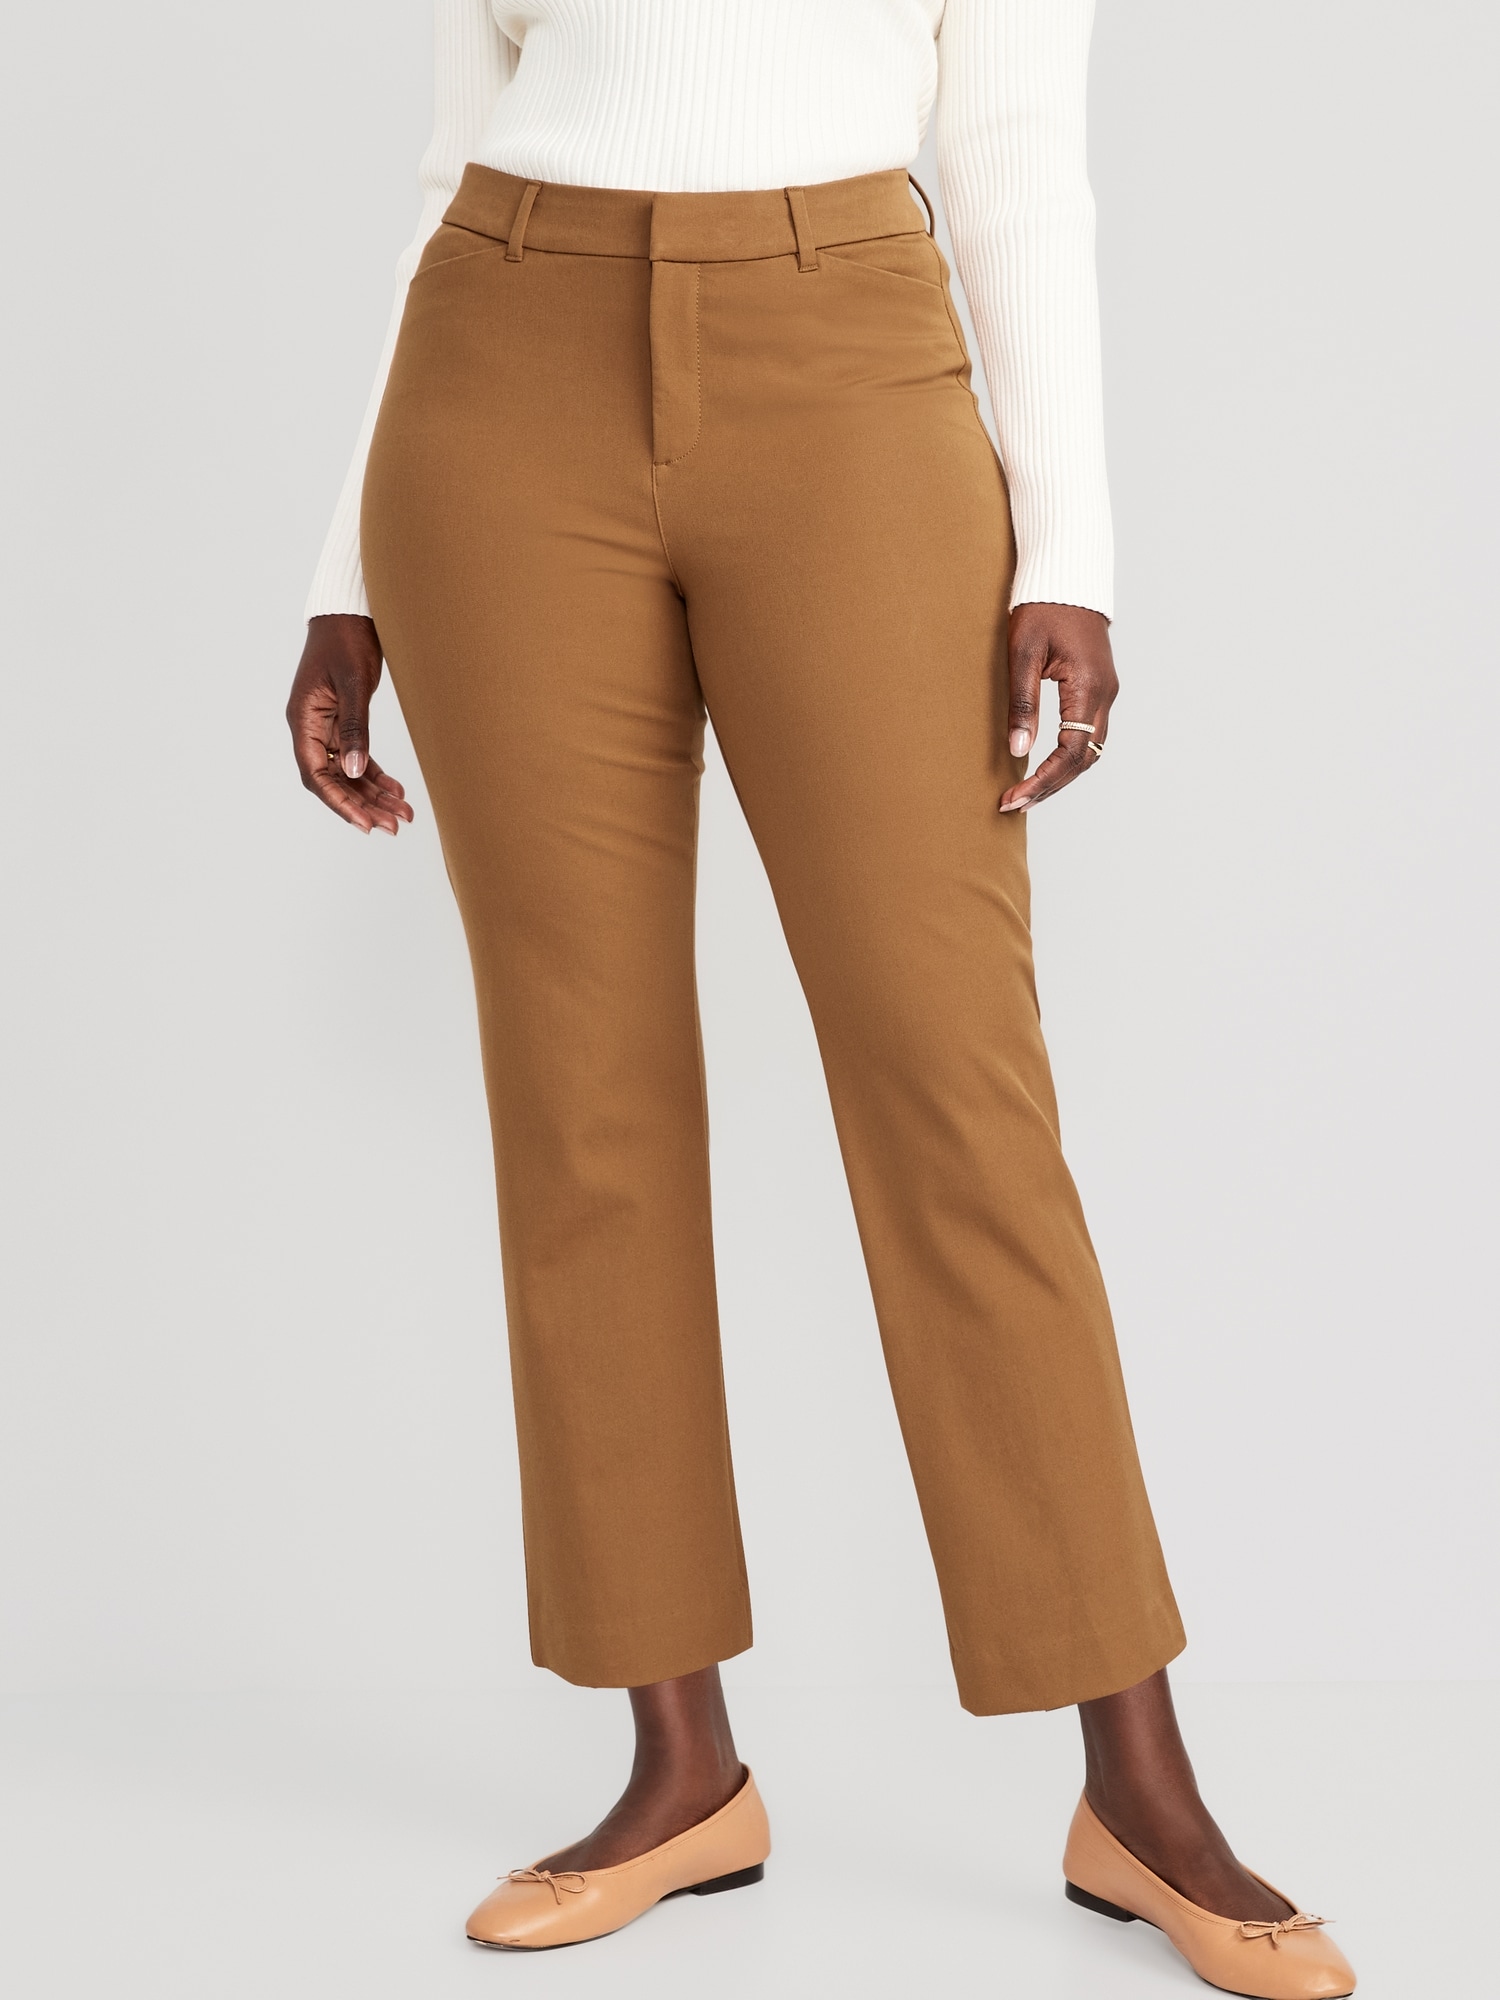 Old Navy Pixie Pants On Sale! $20 Styles Today ONLY!